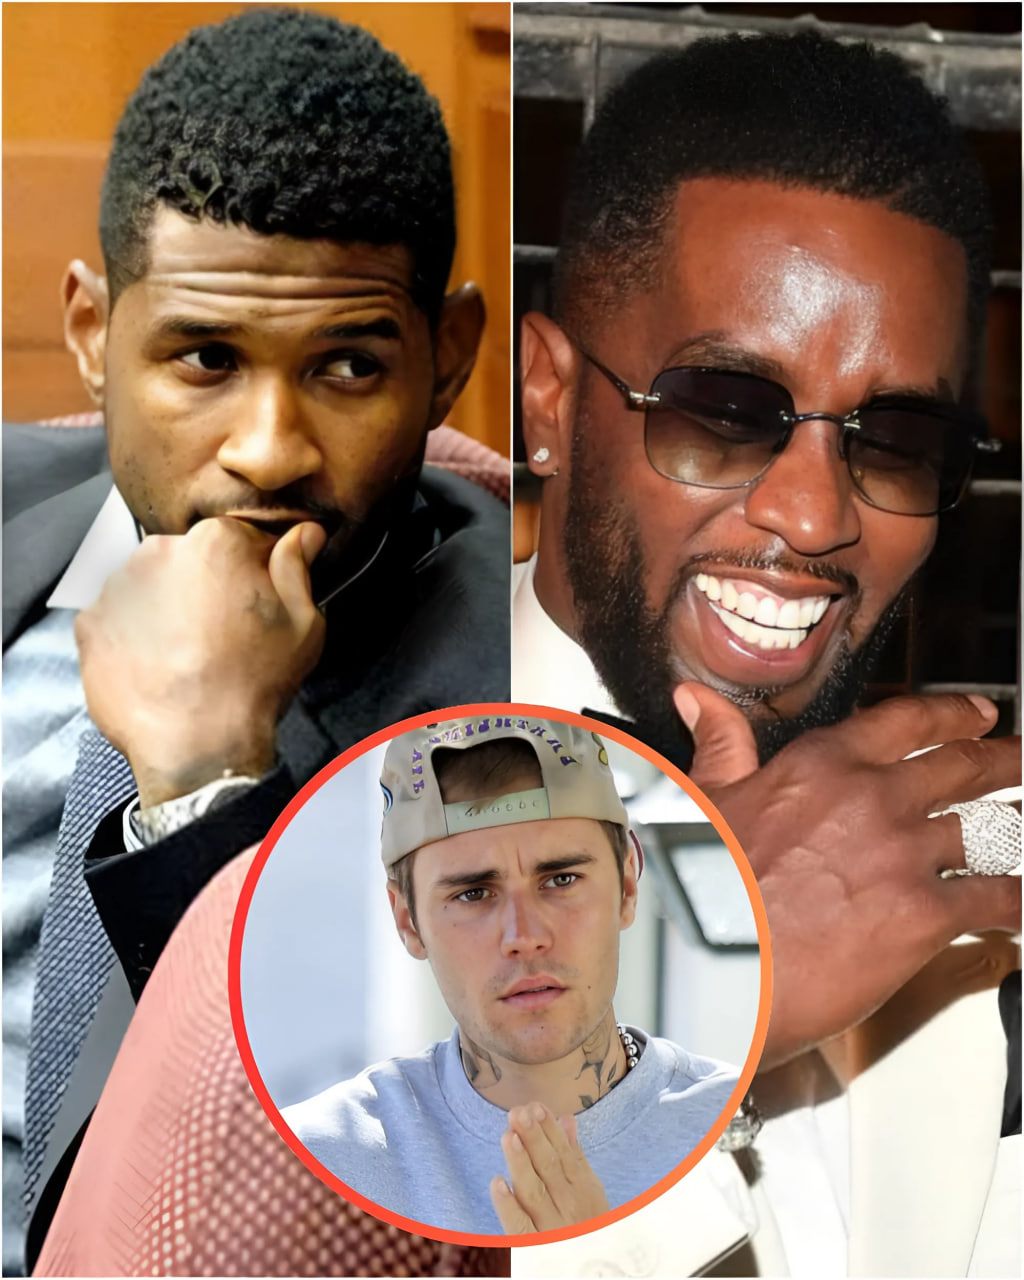 DISTURBING, Sick! Usher CONFIRMS Our Worst Fears About Diddy & Allowed Justin Bieber To Follow!?